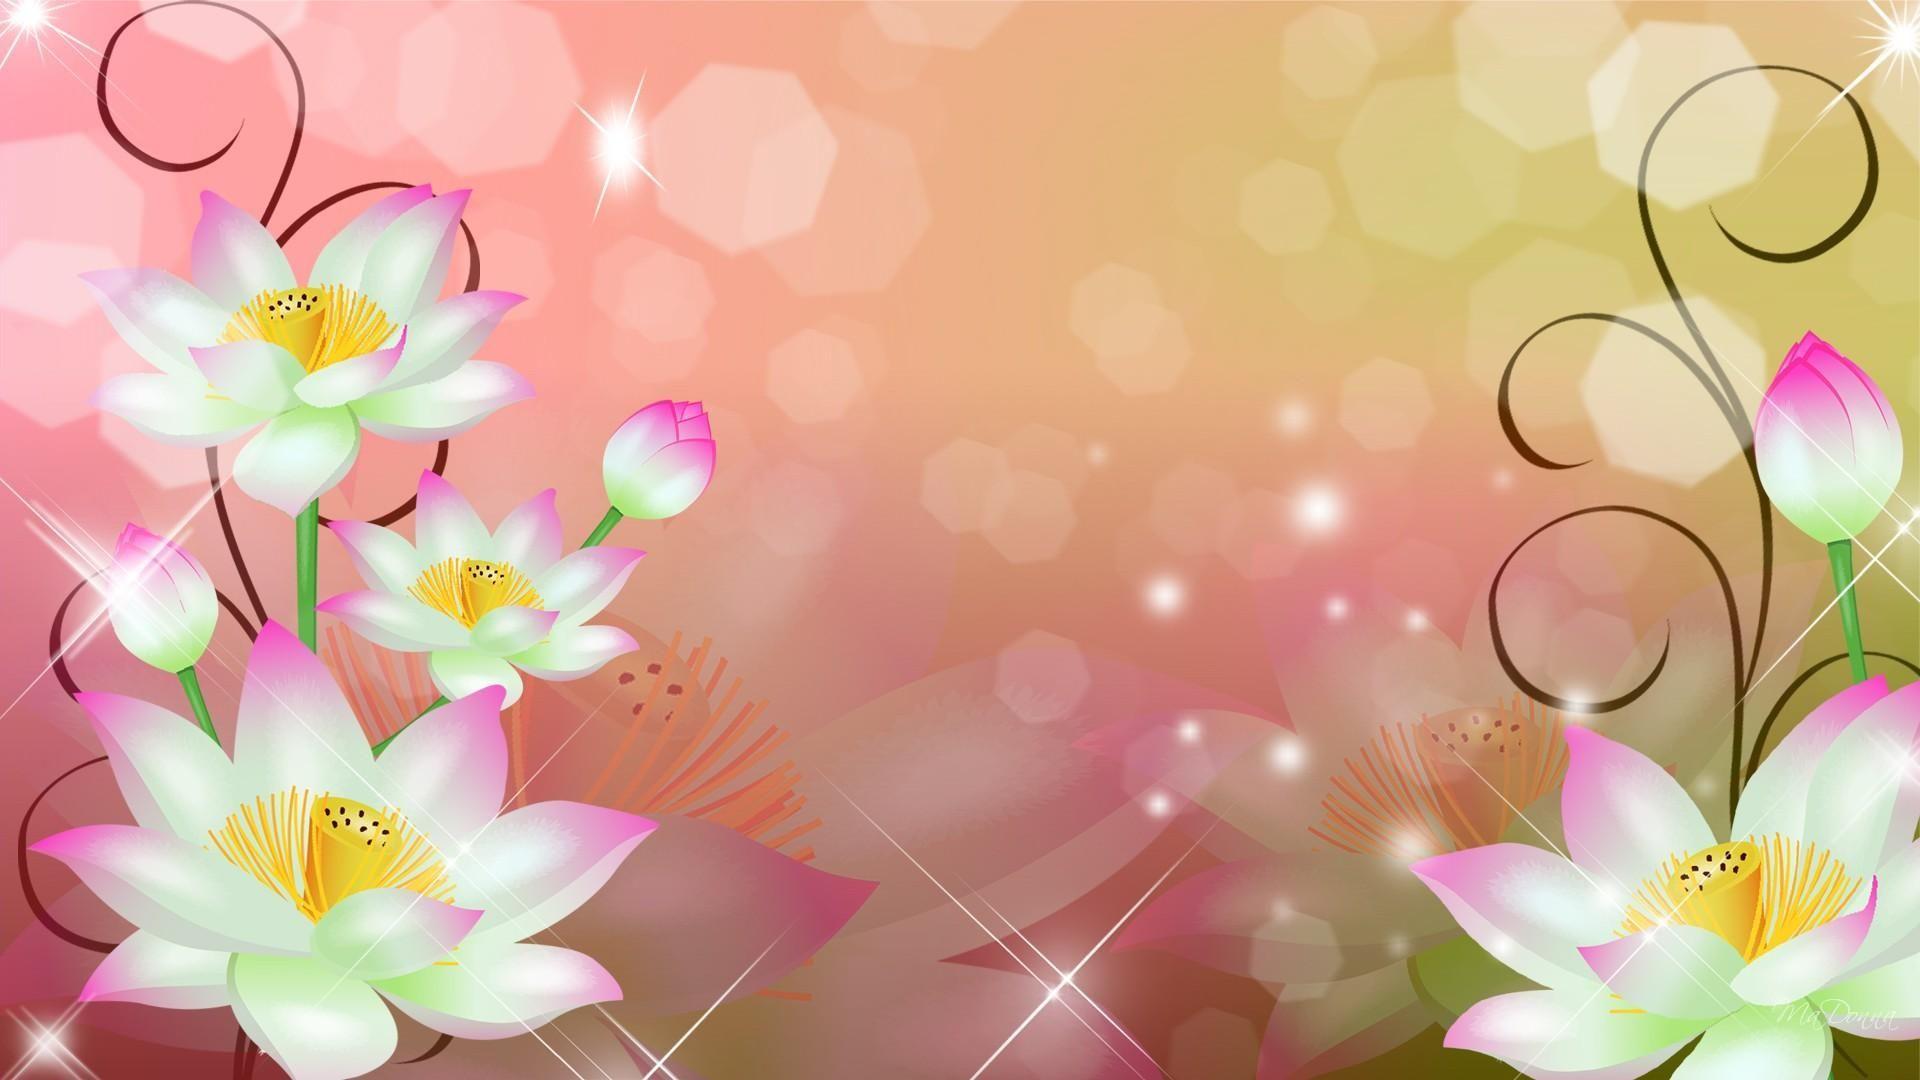 Abstract Spring Desktop Wallpapers - Top Free Abstract Spring Desktop